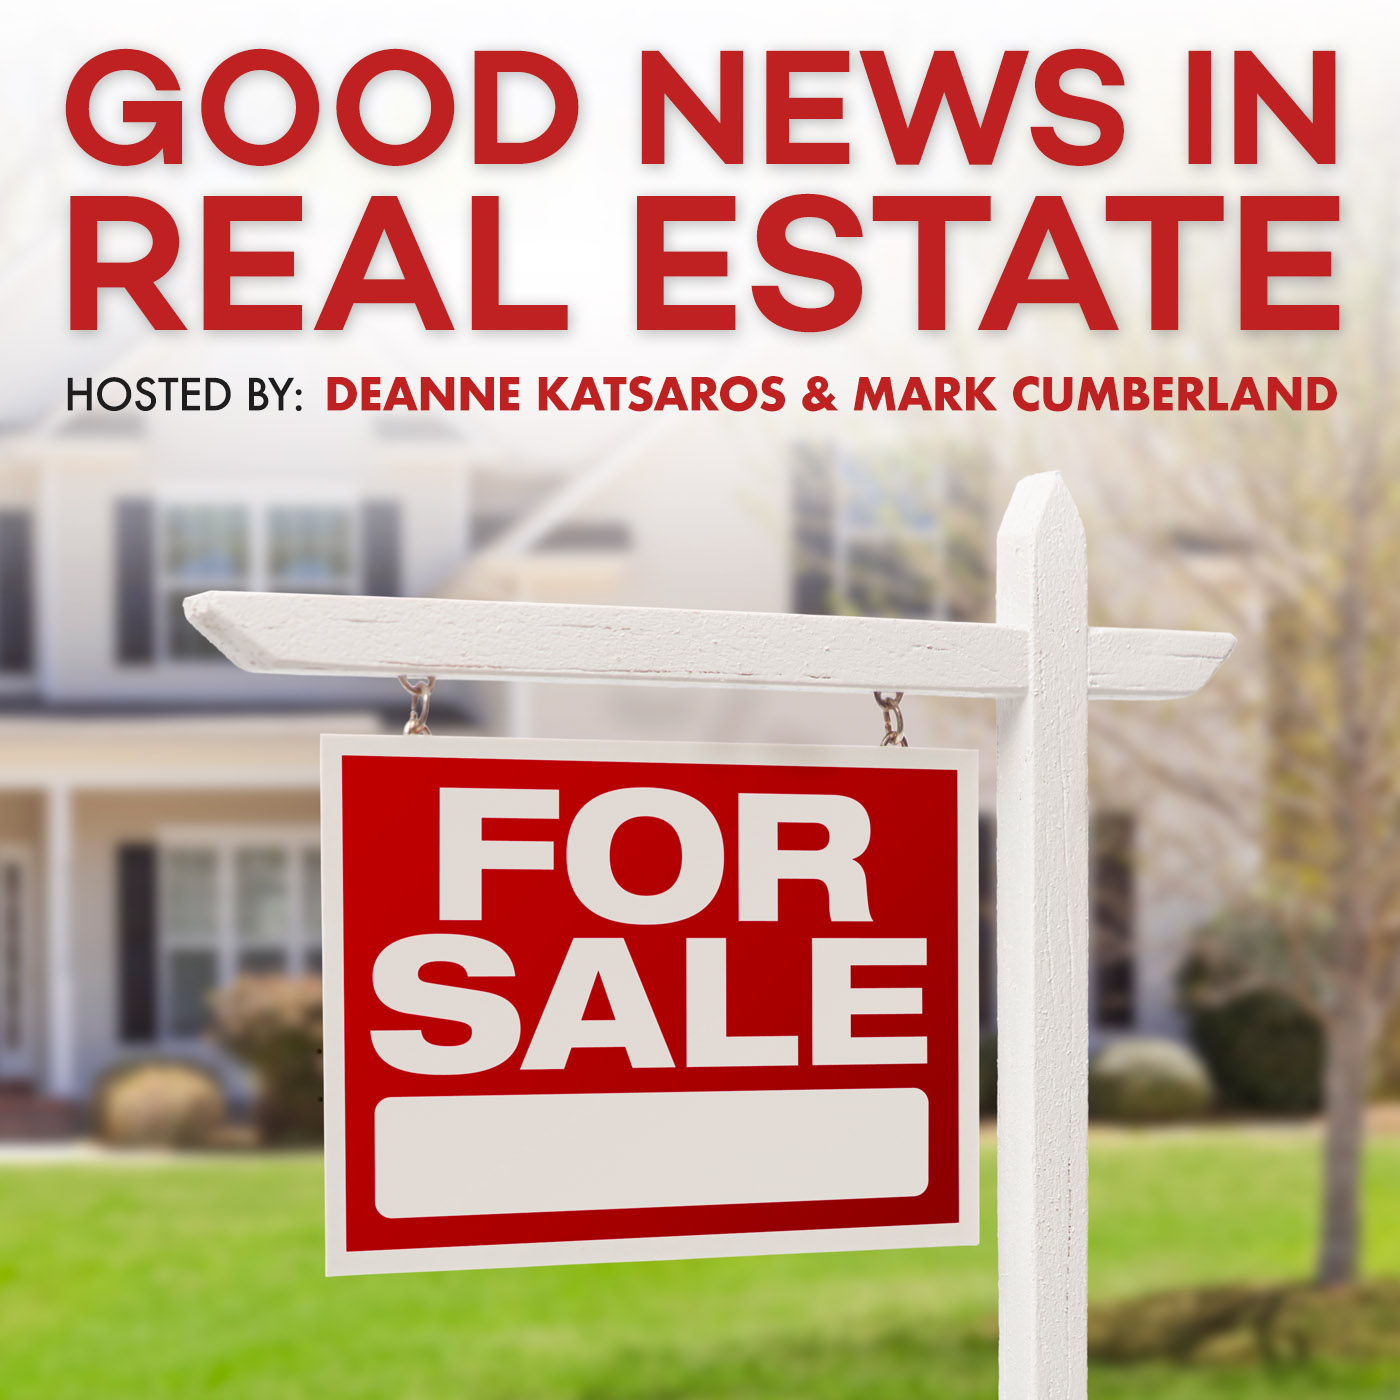 May 8, 2021 | Good News in Real Estate